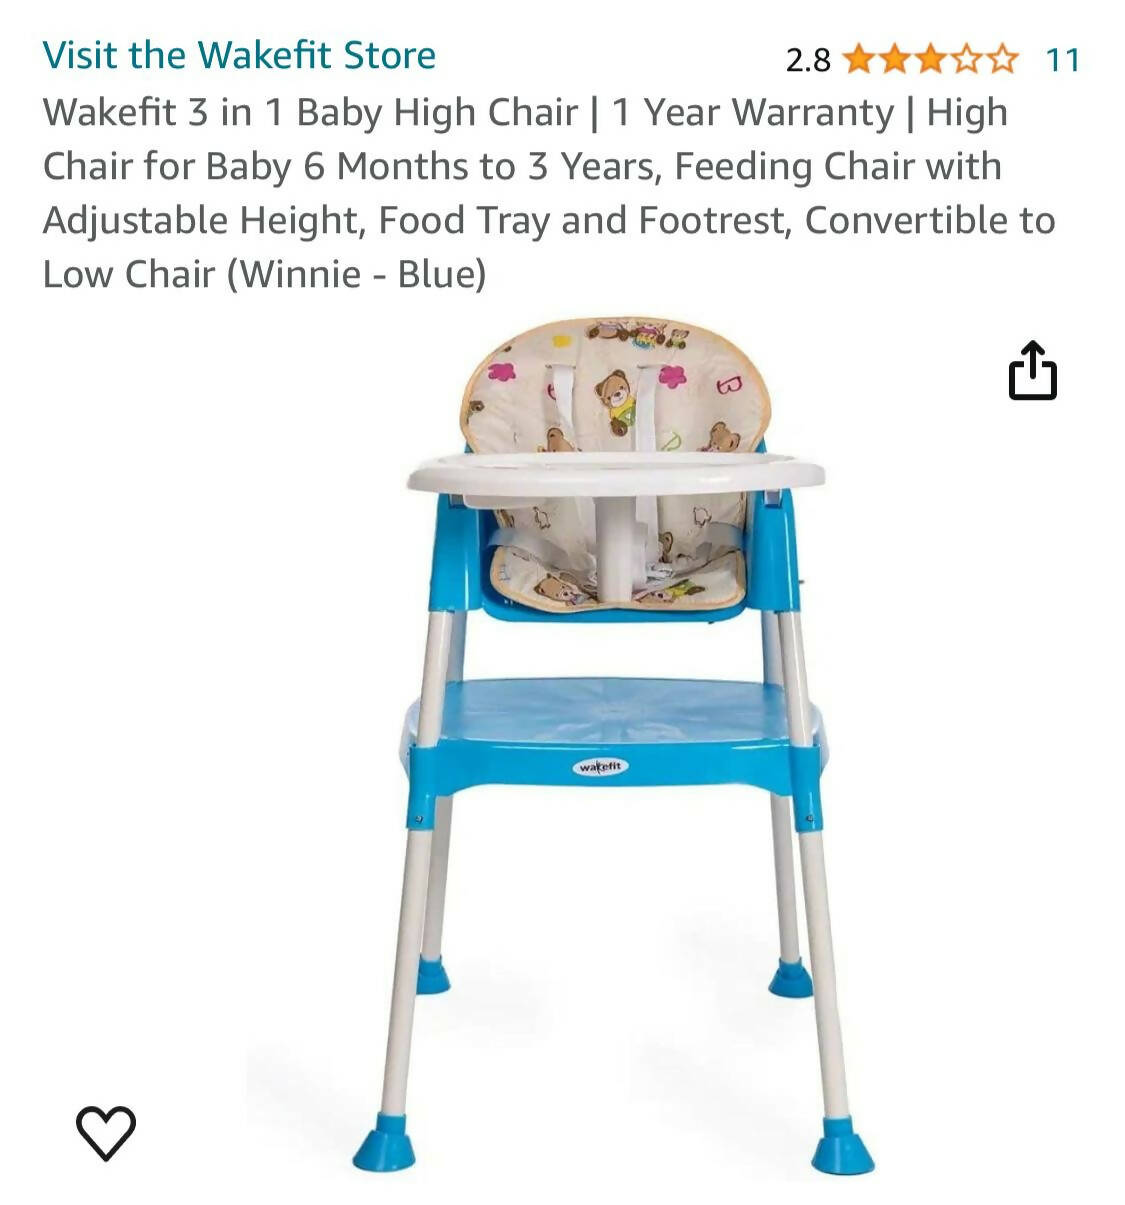 Transform mealtimes with the versatile WAKEFIT 3-in-1 High Chair Meal Chair Table - safety, comfort, and convenience in one!